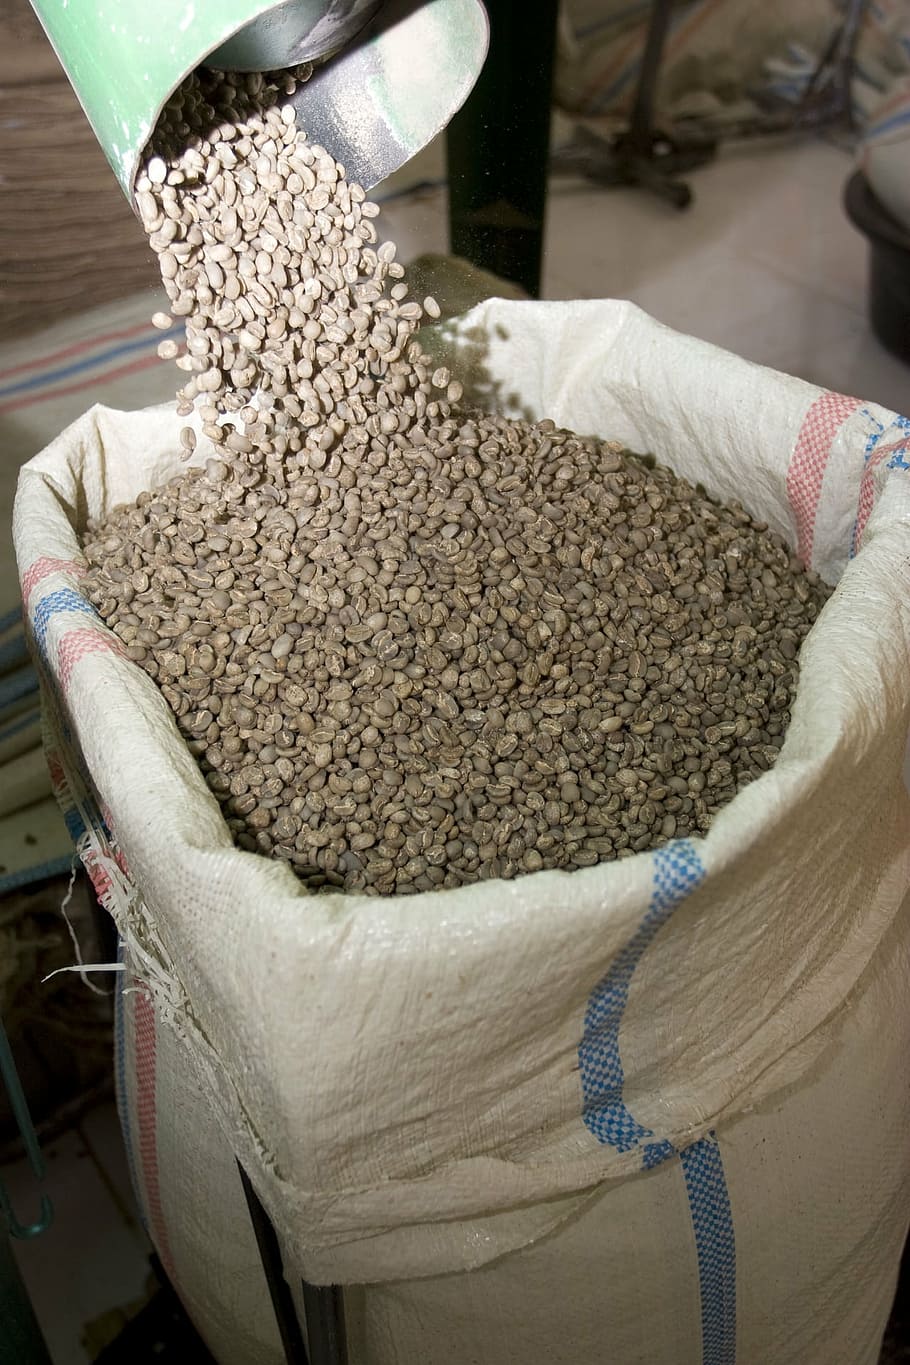 coffee beans, raw, brown, sack, bag, packing, shipment, market, agriculture, farmer